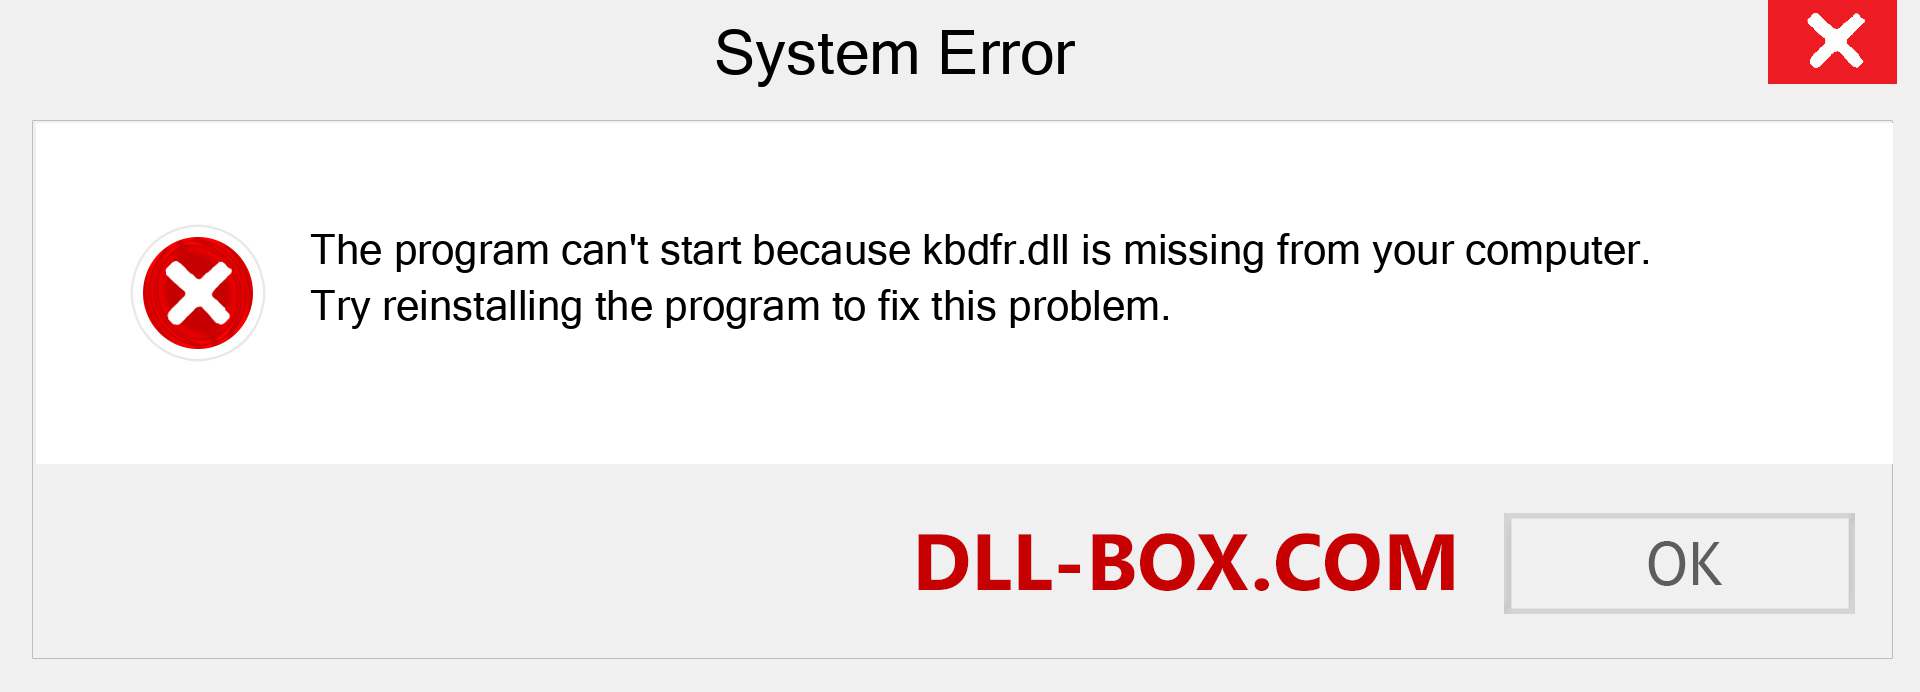  kbdfr.dll file is missing?. Download for Windows 7, 8, 10 - Fix  kbdfr dll Missing Error on Windows, photos, images